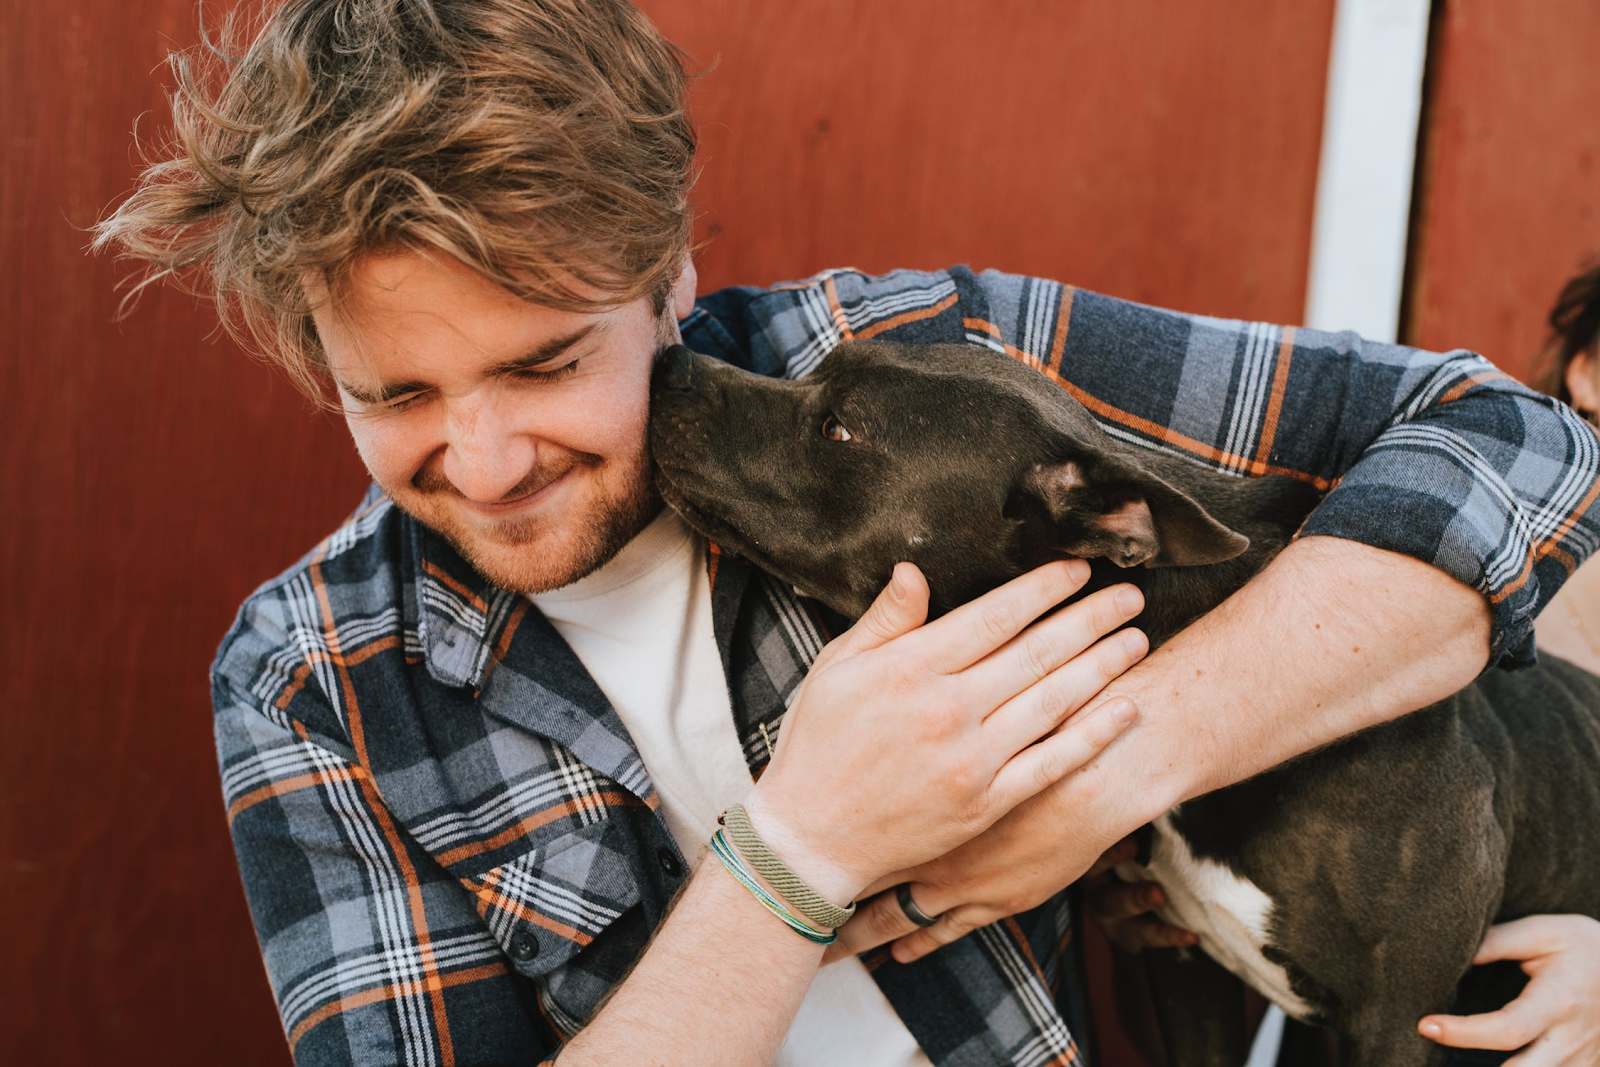 a black pitbull terrier with a white stomach kisses a man with blond hair and a gray and orange flannel shirt on the cheek